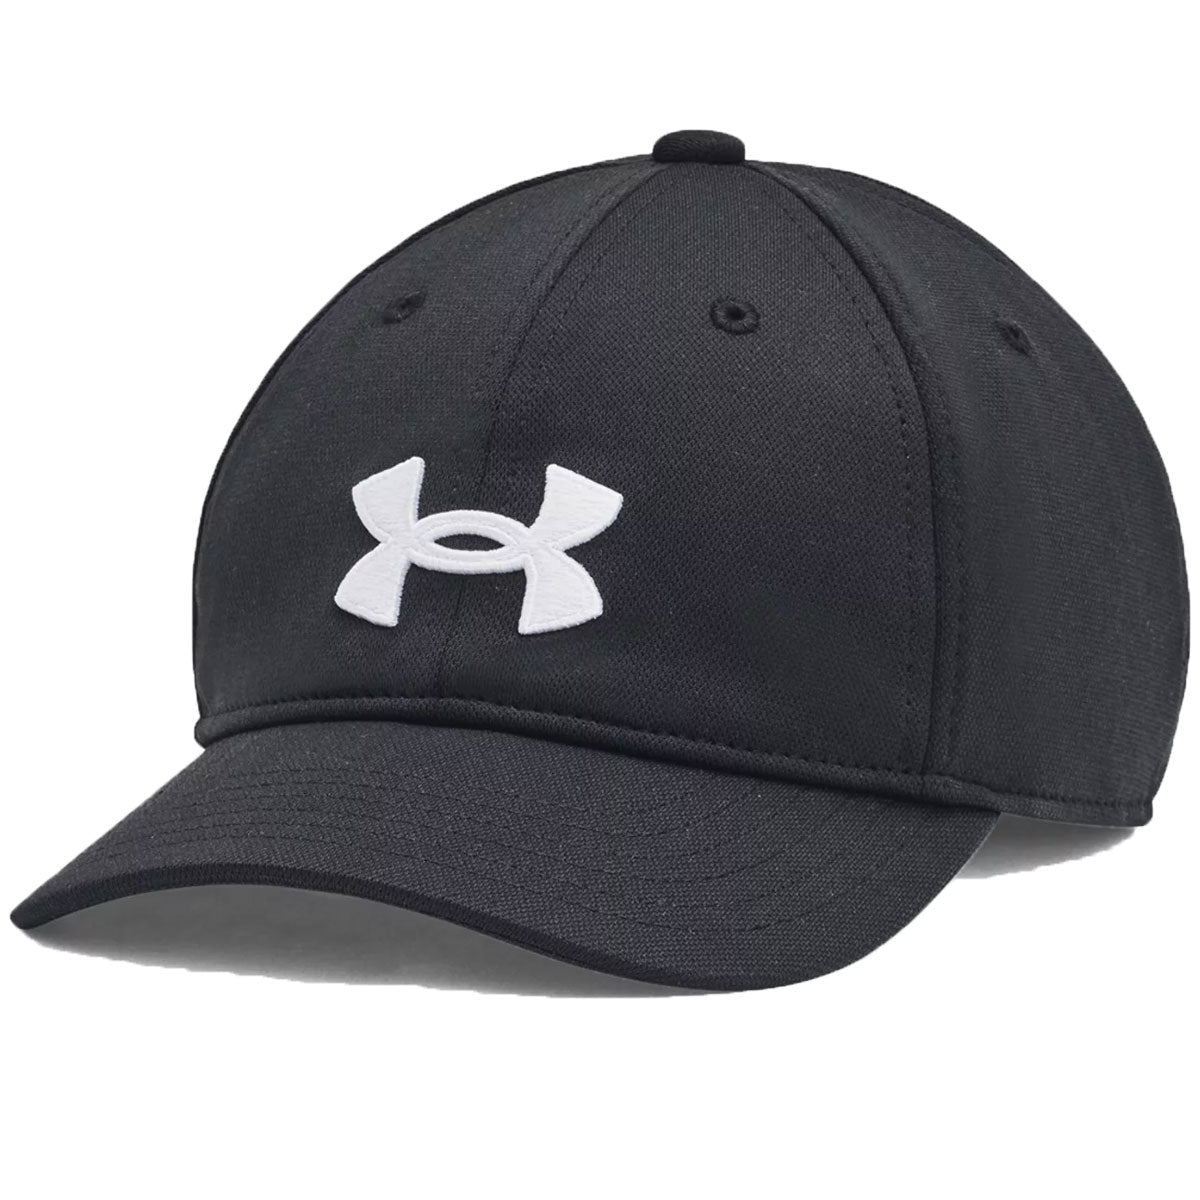 Under Armour Adjustable Blitzing Cap - Youth - Black/White